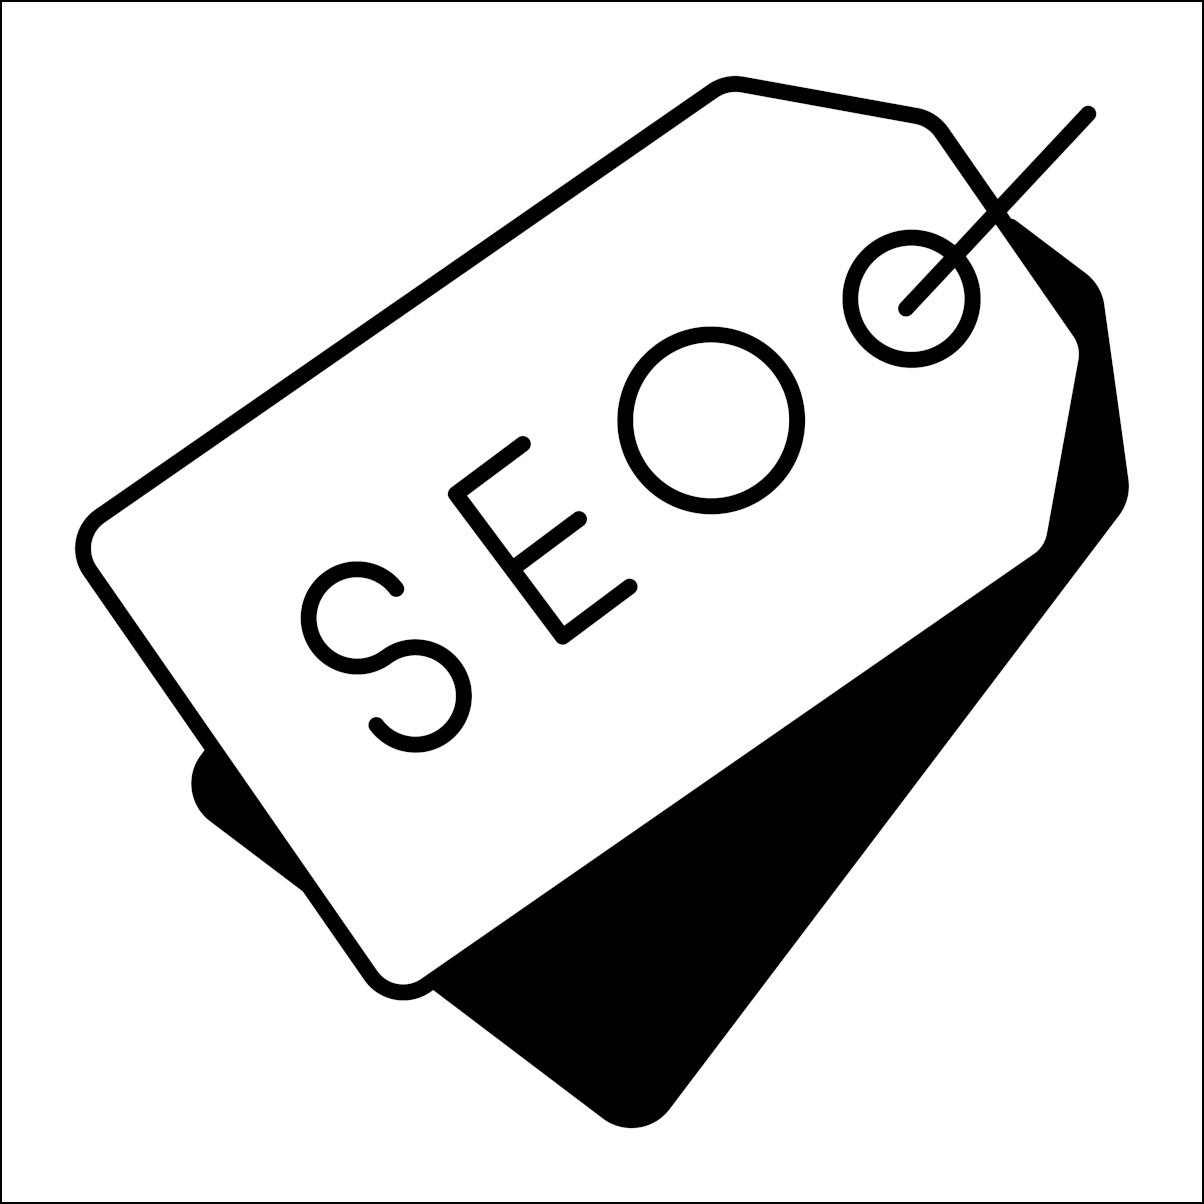 How is guest posting related to SEO?